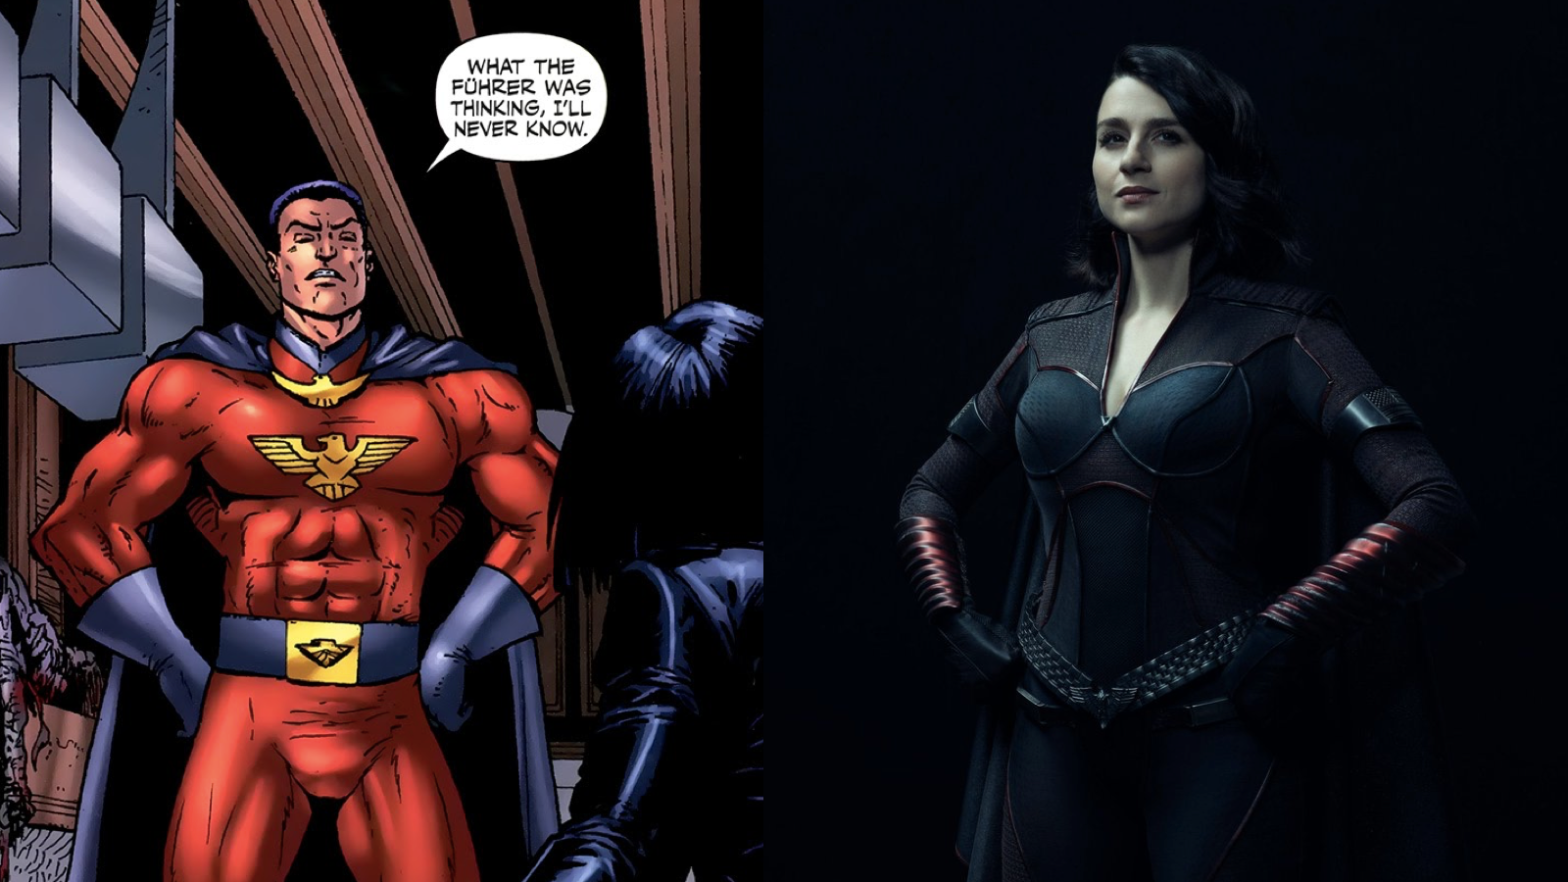 Stormfront as he appears in issue #31, and Stormfront as portrayed by Aya Cash. (Image: Carlos Ezquerra, Hector Ezquerra, Tony Aviña, Simon Bowland, Dynamite, Amazon Studios)